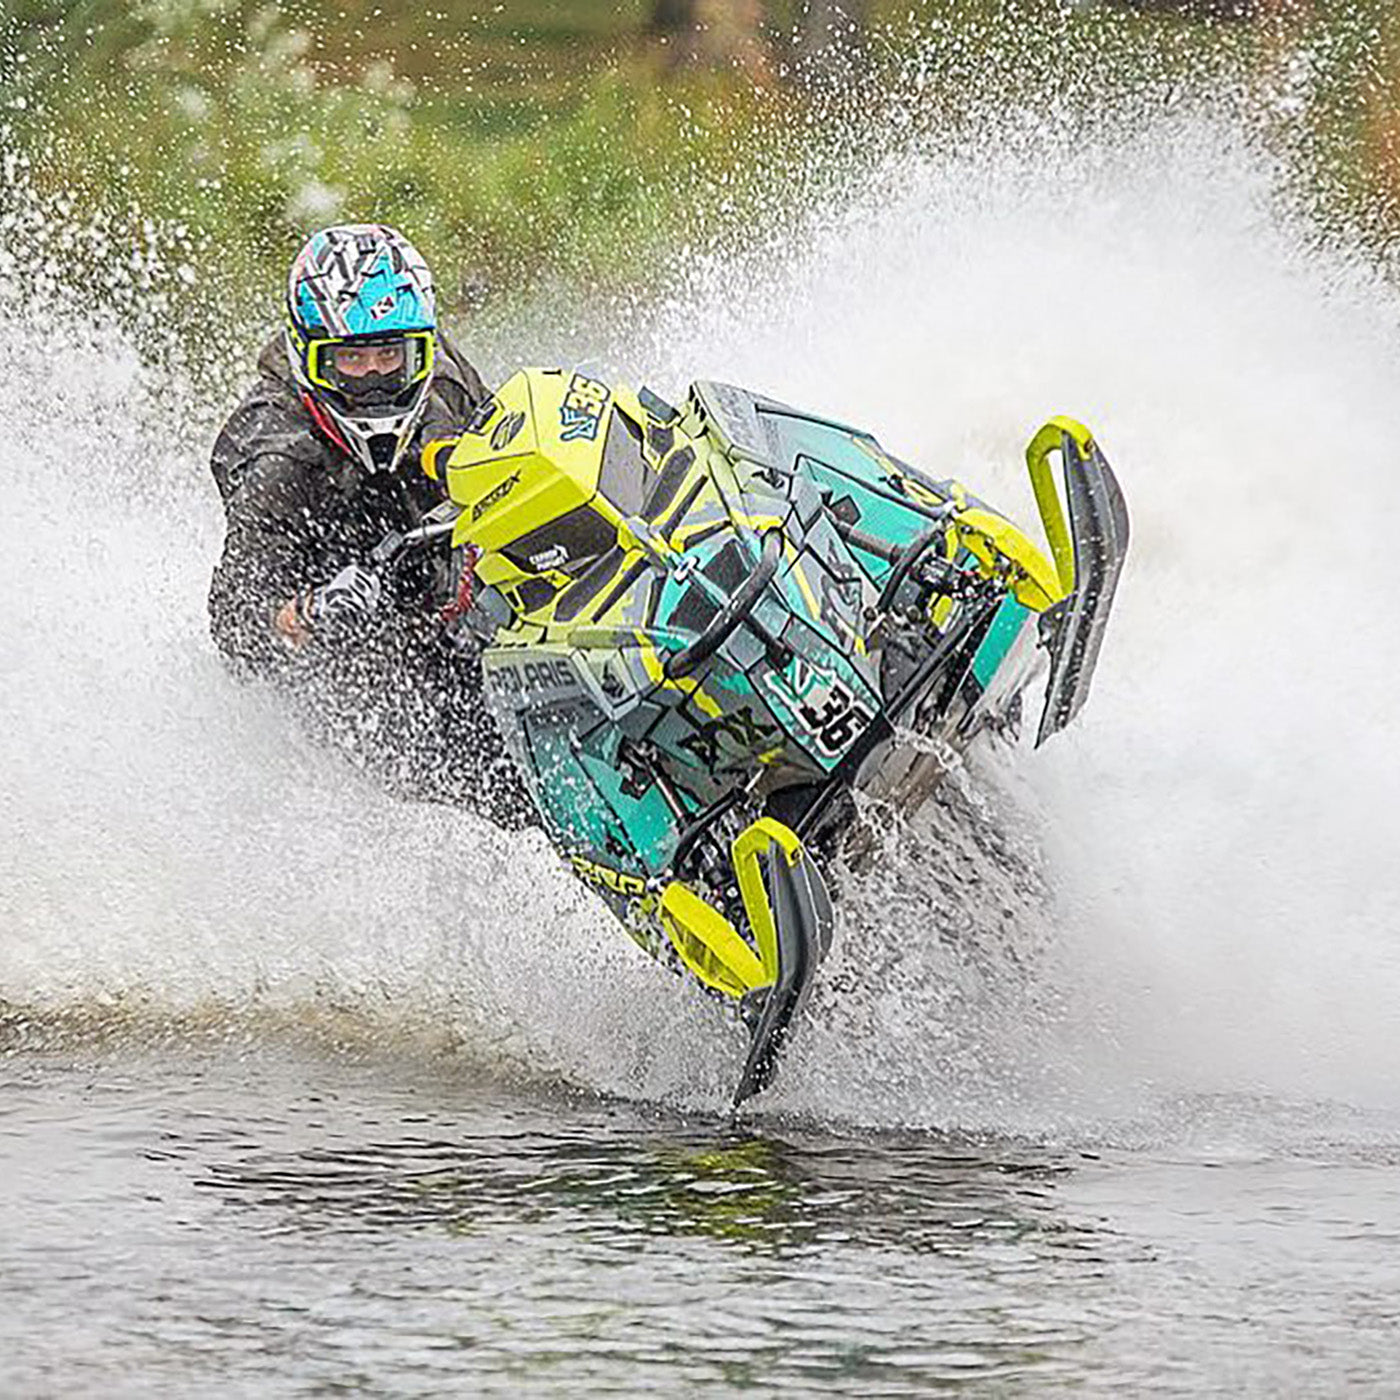 Watercross racer David Fischer racing on the water with black C&A Pro skis with yellow handles